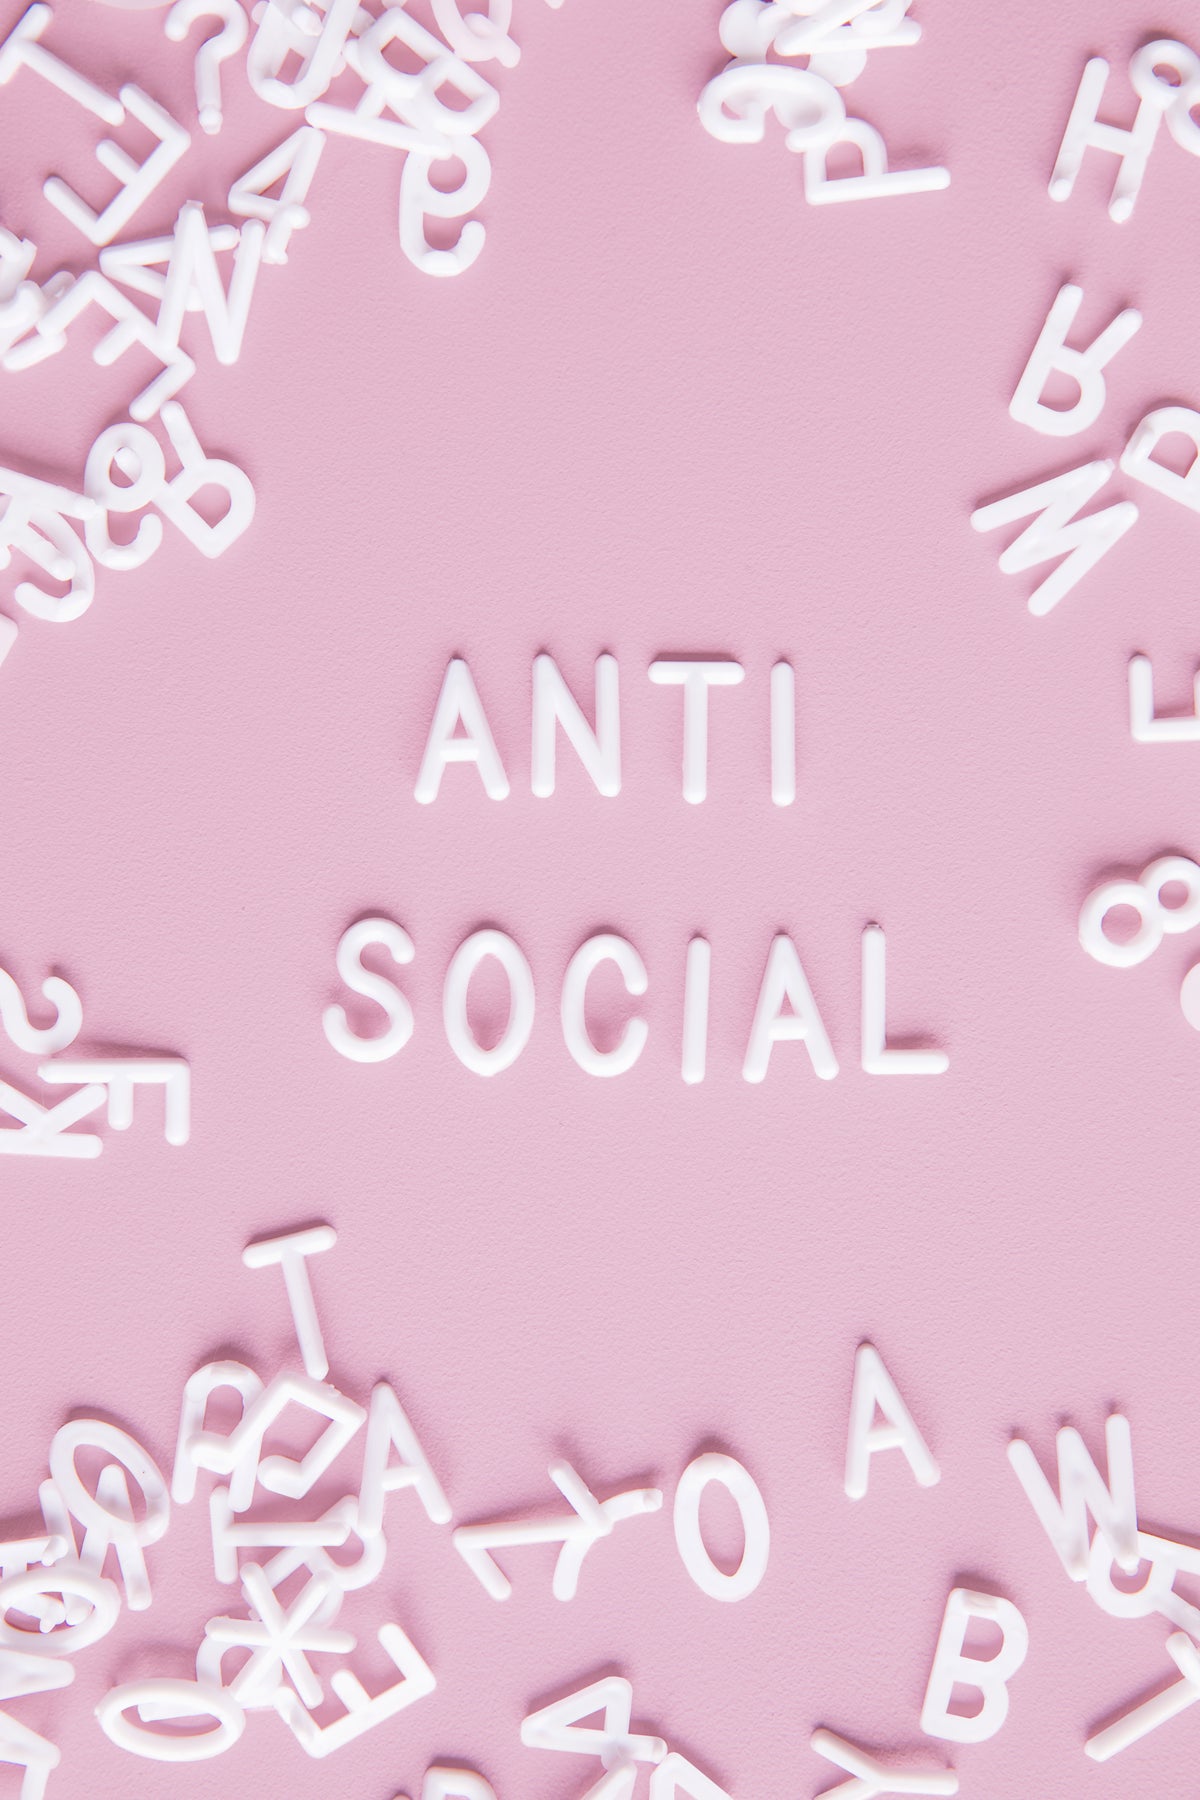 a pink and white letter board spells out "anti-social"